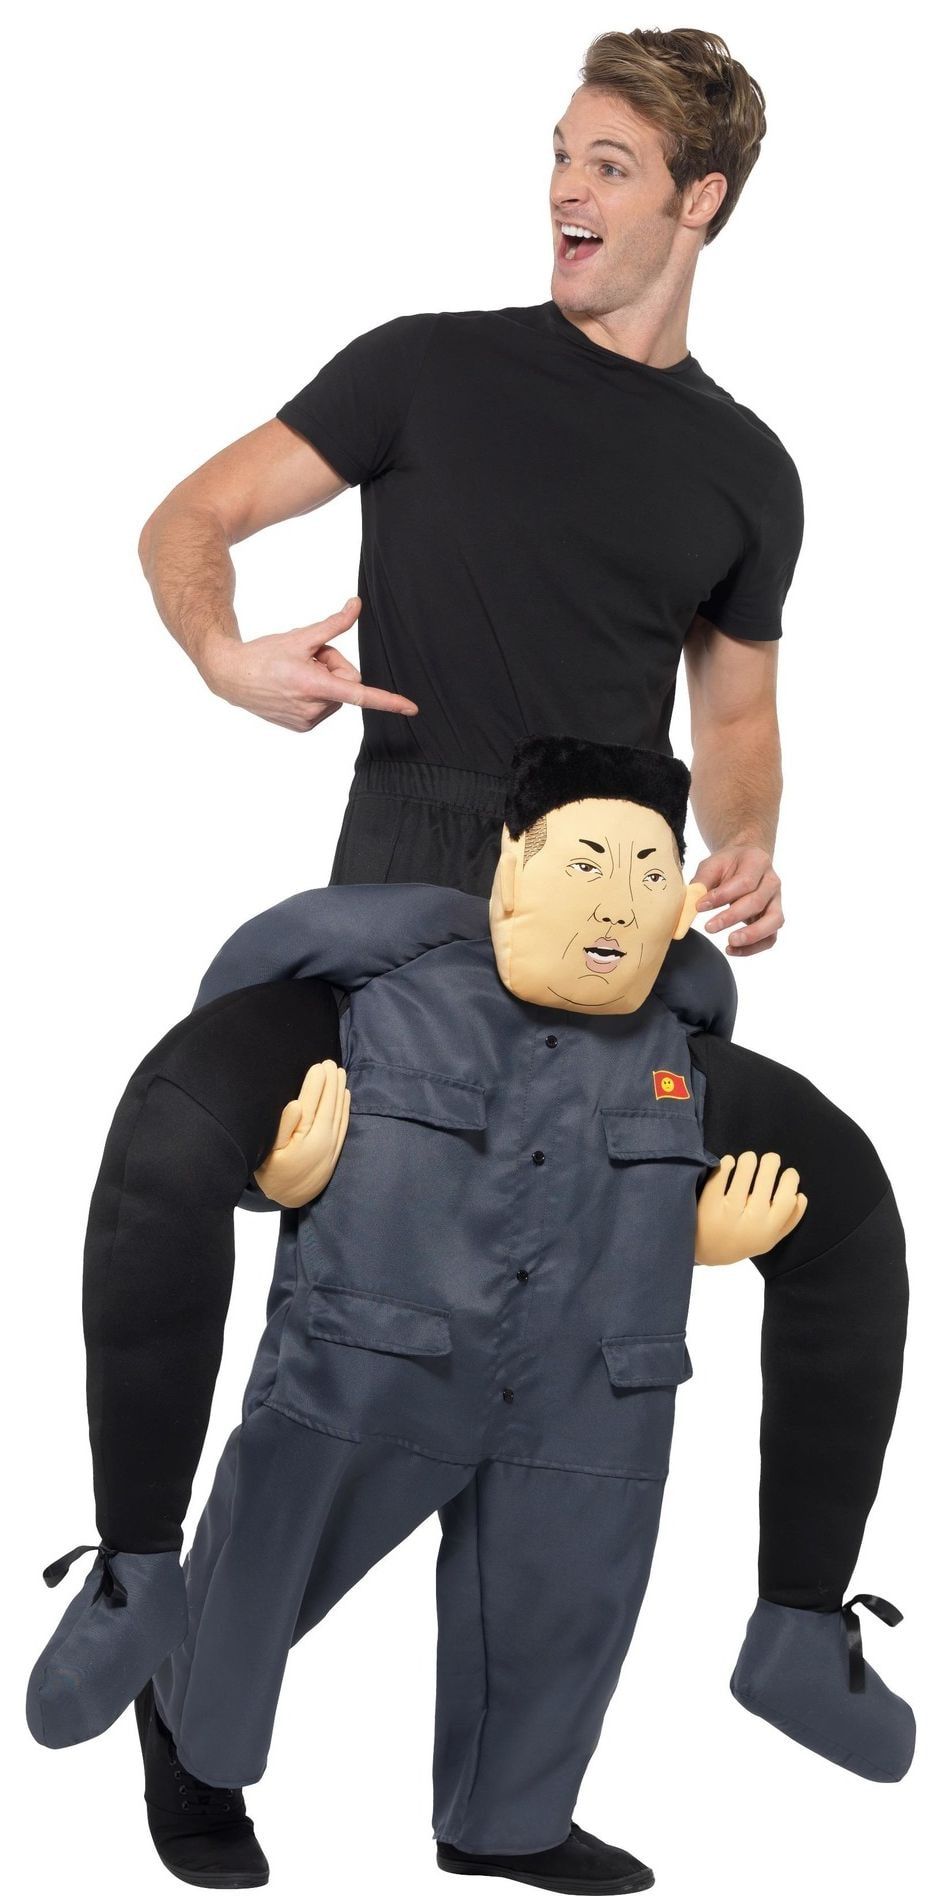 Carry me dictator